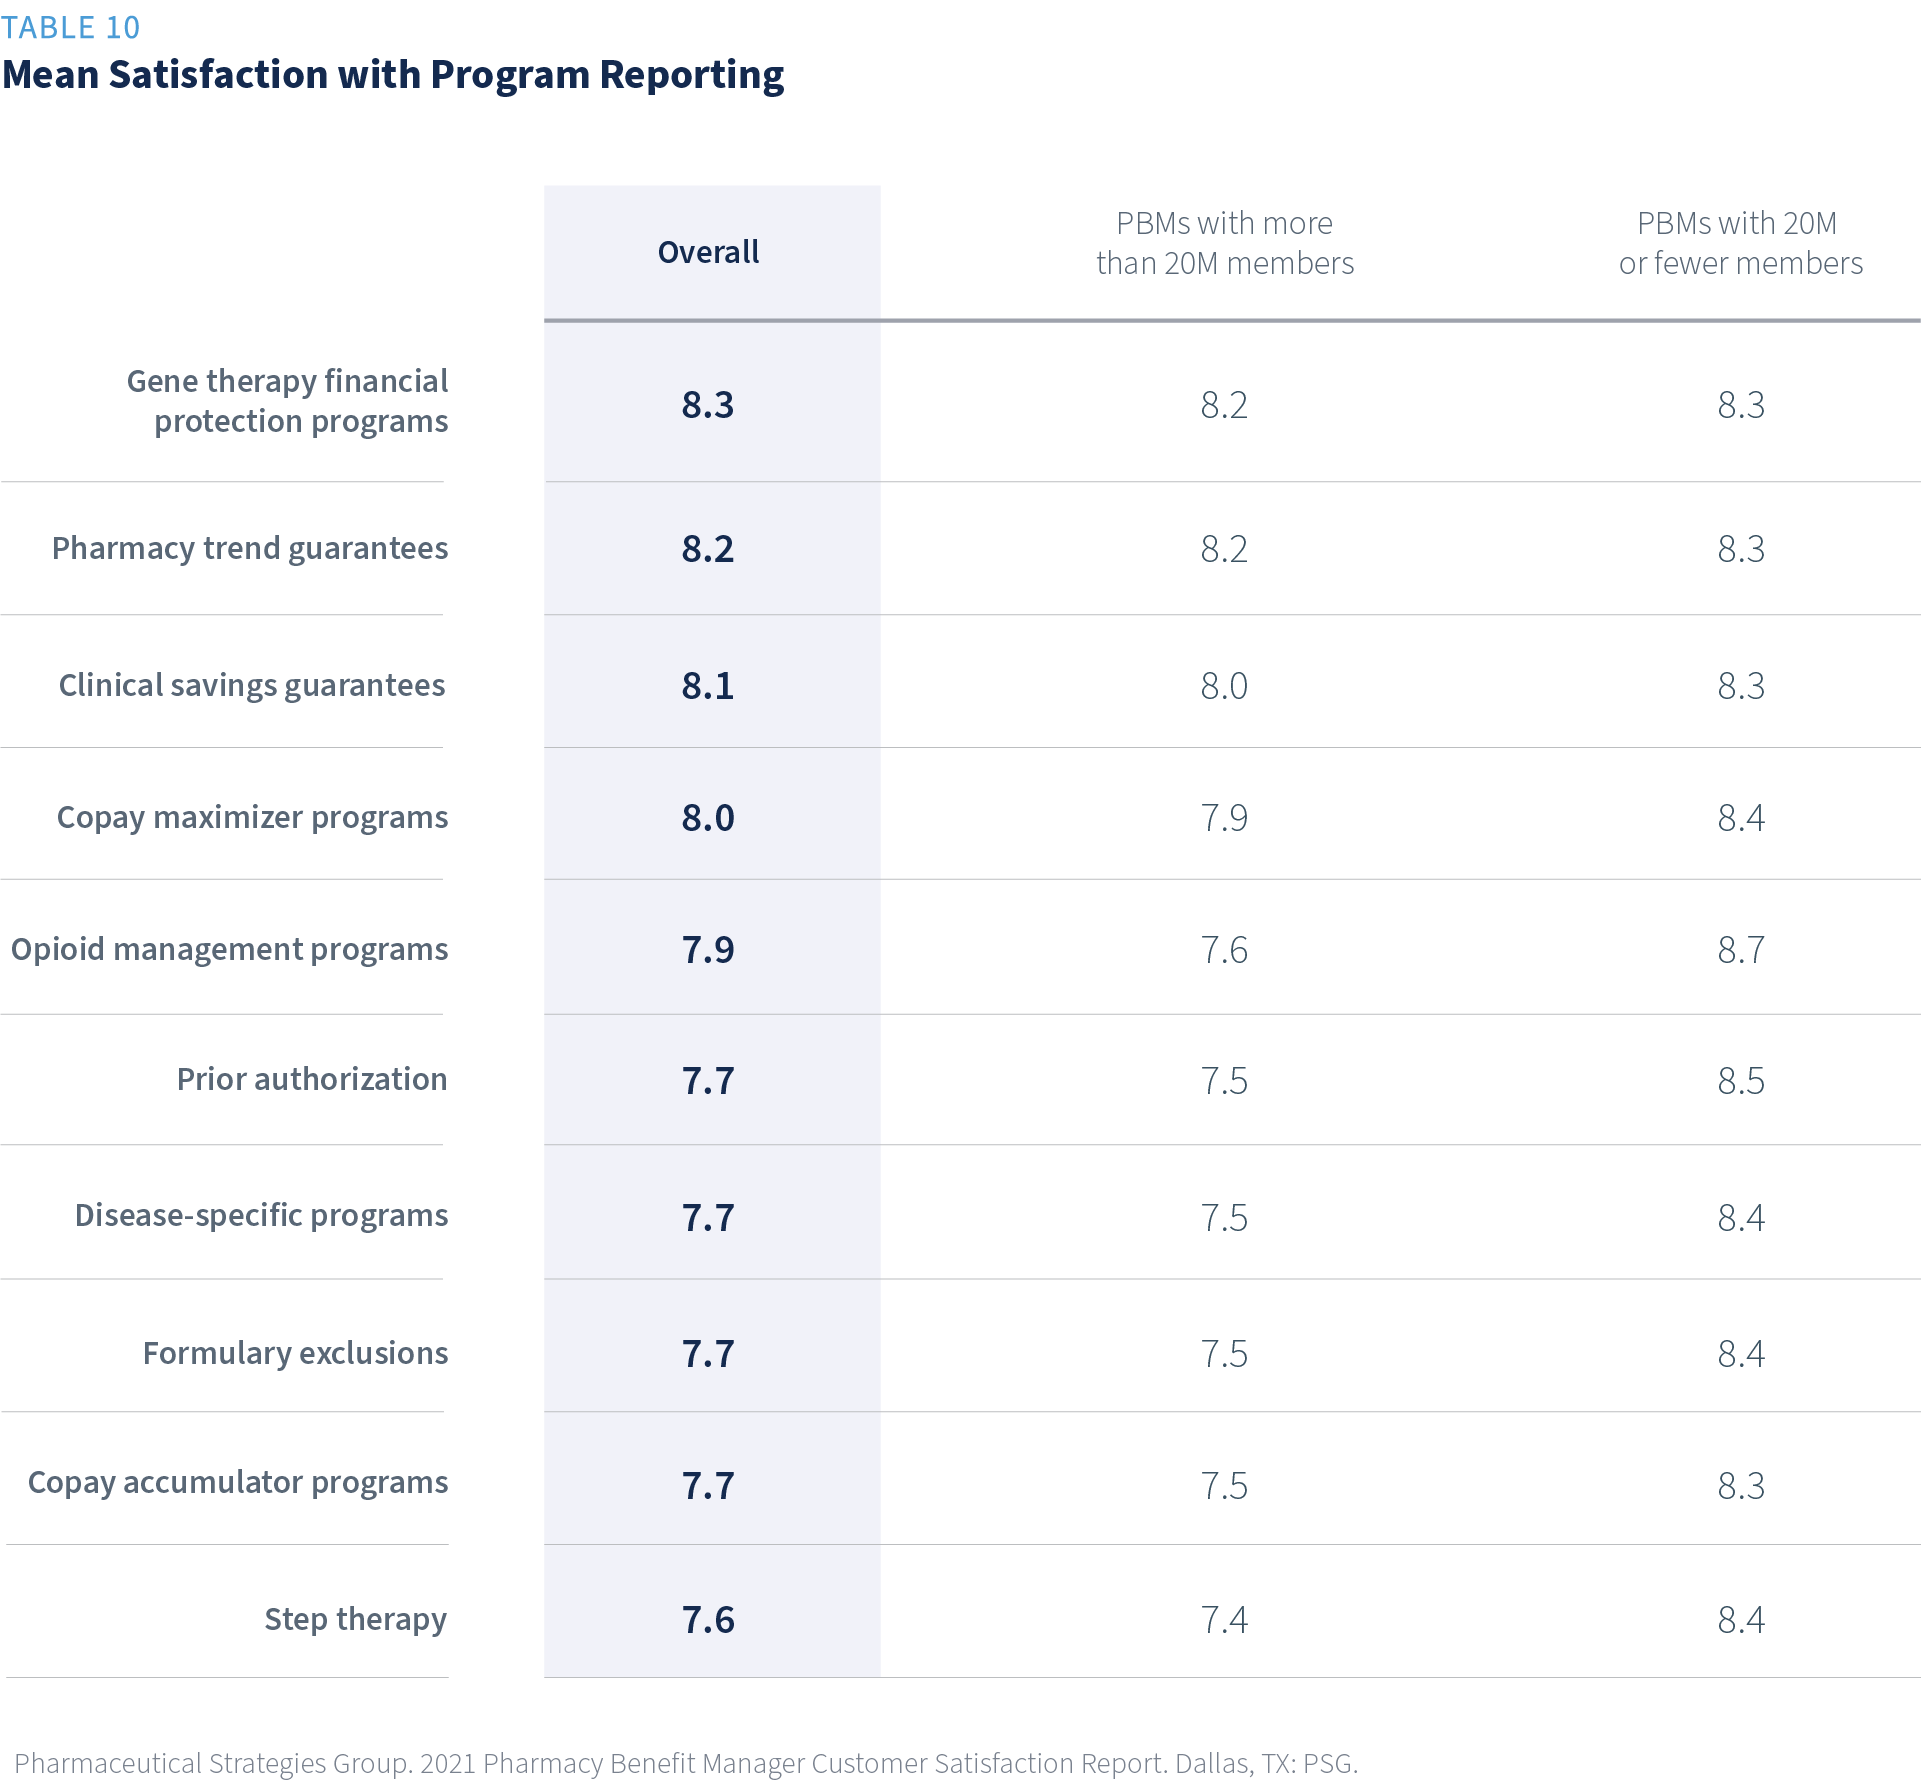 Mean satisfaction with program reporting survey results